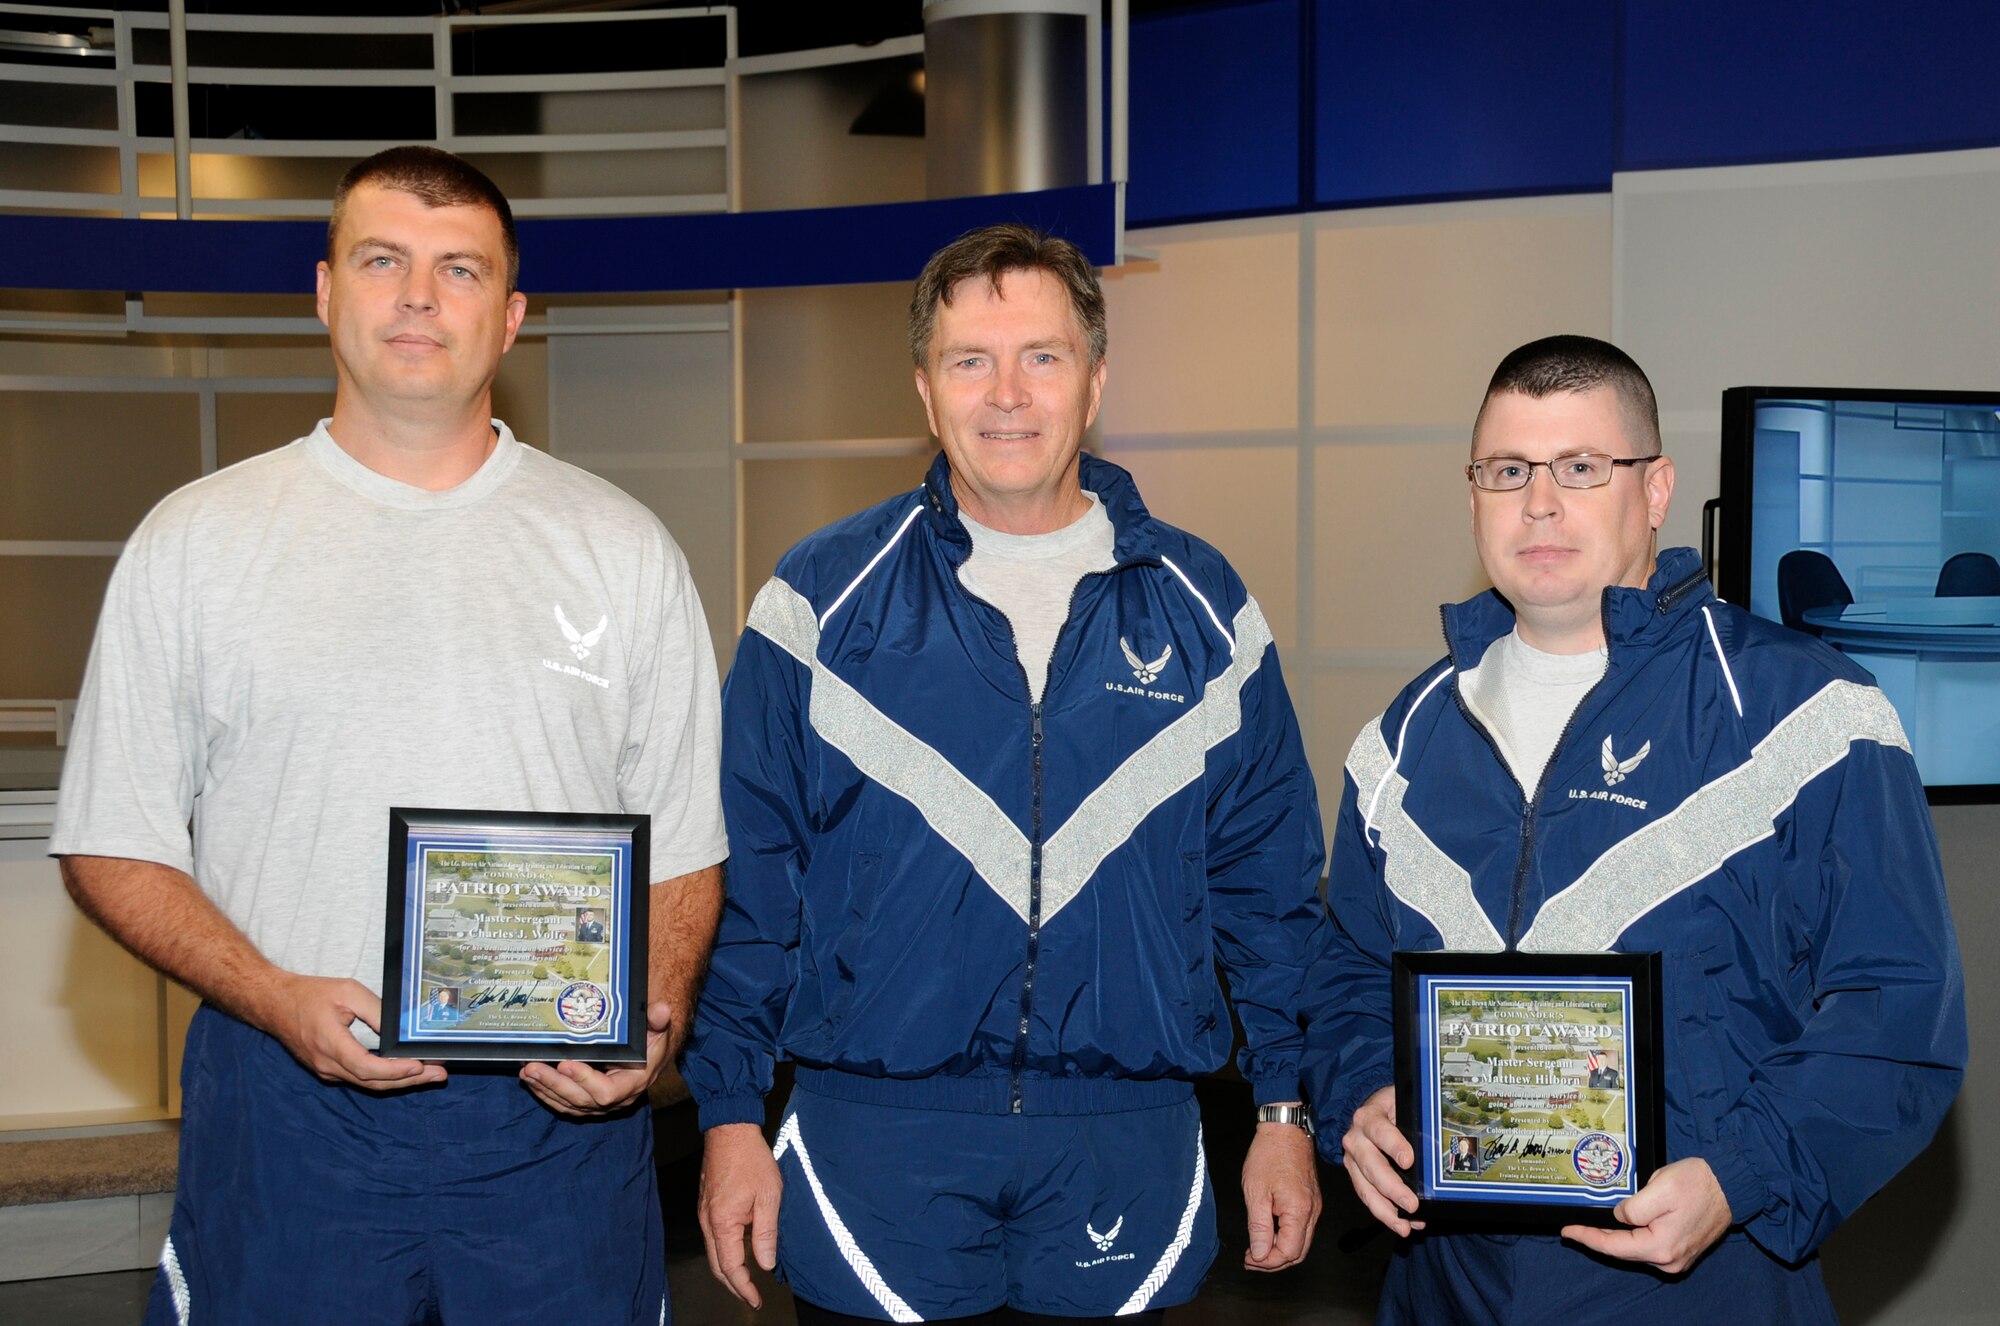 McGHEE TYSON AIR NATIONAL GUARD BASE, Tenn. - Col. Richard B. Howard, center, commander of The I.G. Brown Air National Guard Training and Education Center here, presents his Patriot Award to Master Sgt. Jason Wolfe, left, NCOIC of infrastructure management for the communications focal point section, and Master Sgt. Matt Hilborn, right, broadcast manager for the TEC-TV studios, for recognition of their contributions to the center, Nov. 24, 2010. The Patriot Award is Howard's personal award to show appreciation for those he feels have gone above and beyond in their service. (U.S. Air Force photo by Master Sgt. Kurt Skoglund/Released)